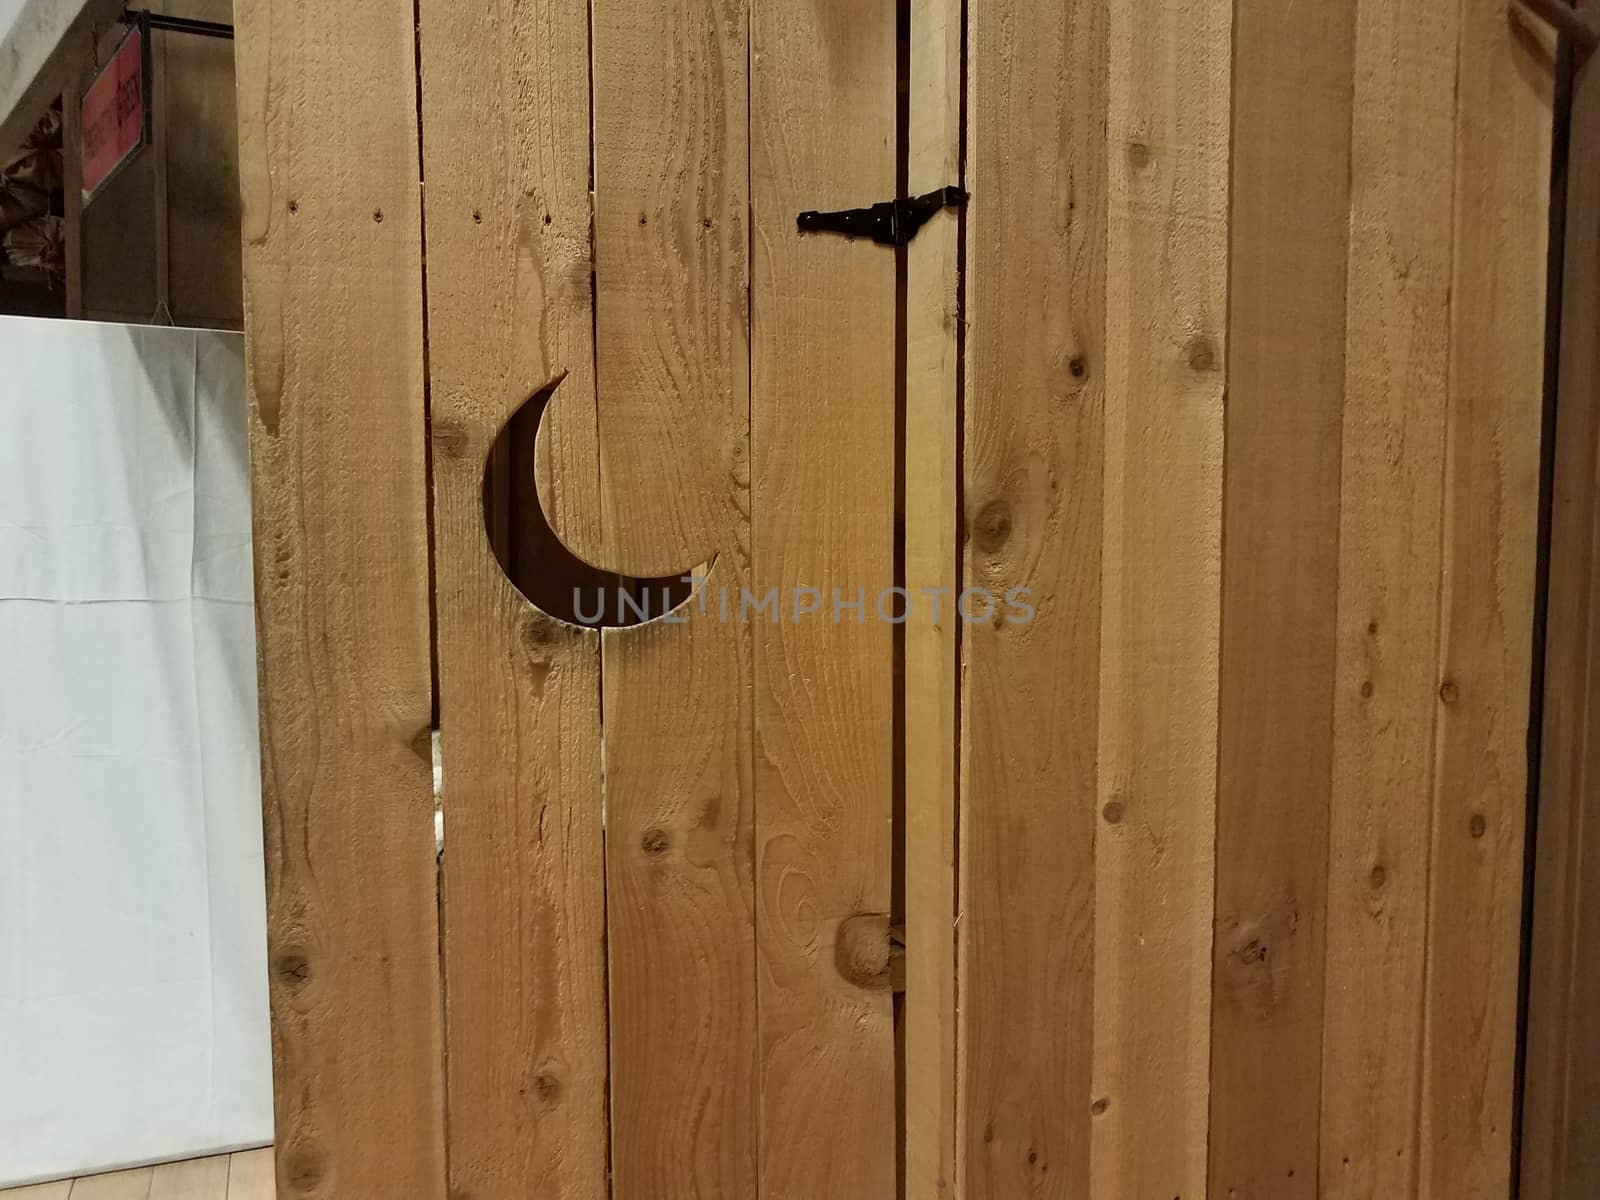 brown wooden door to outhouse bathroom with moon shaped hole or window